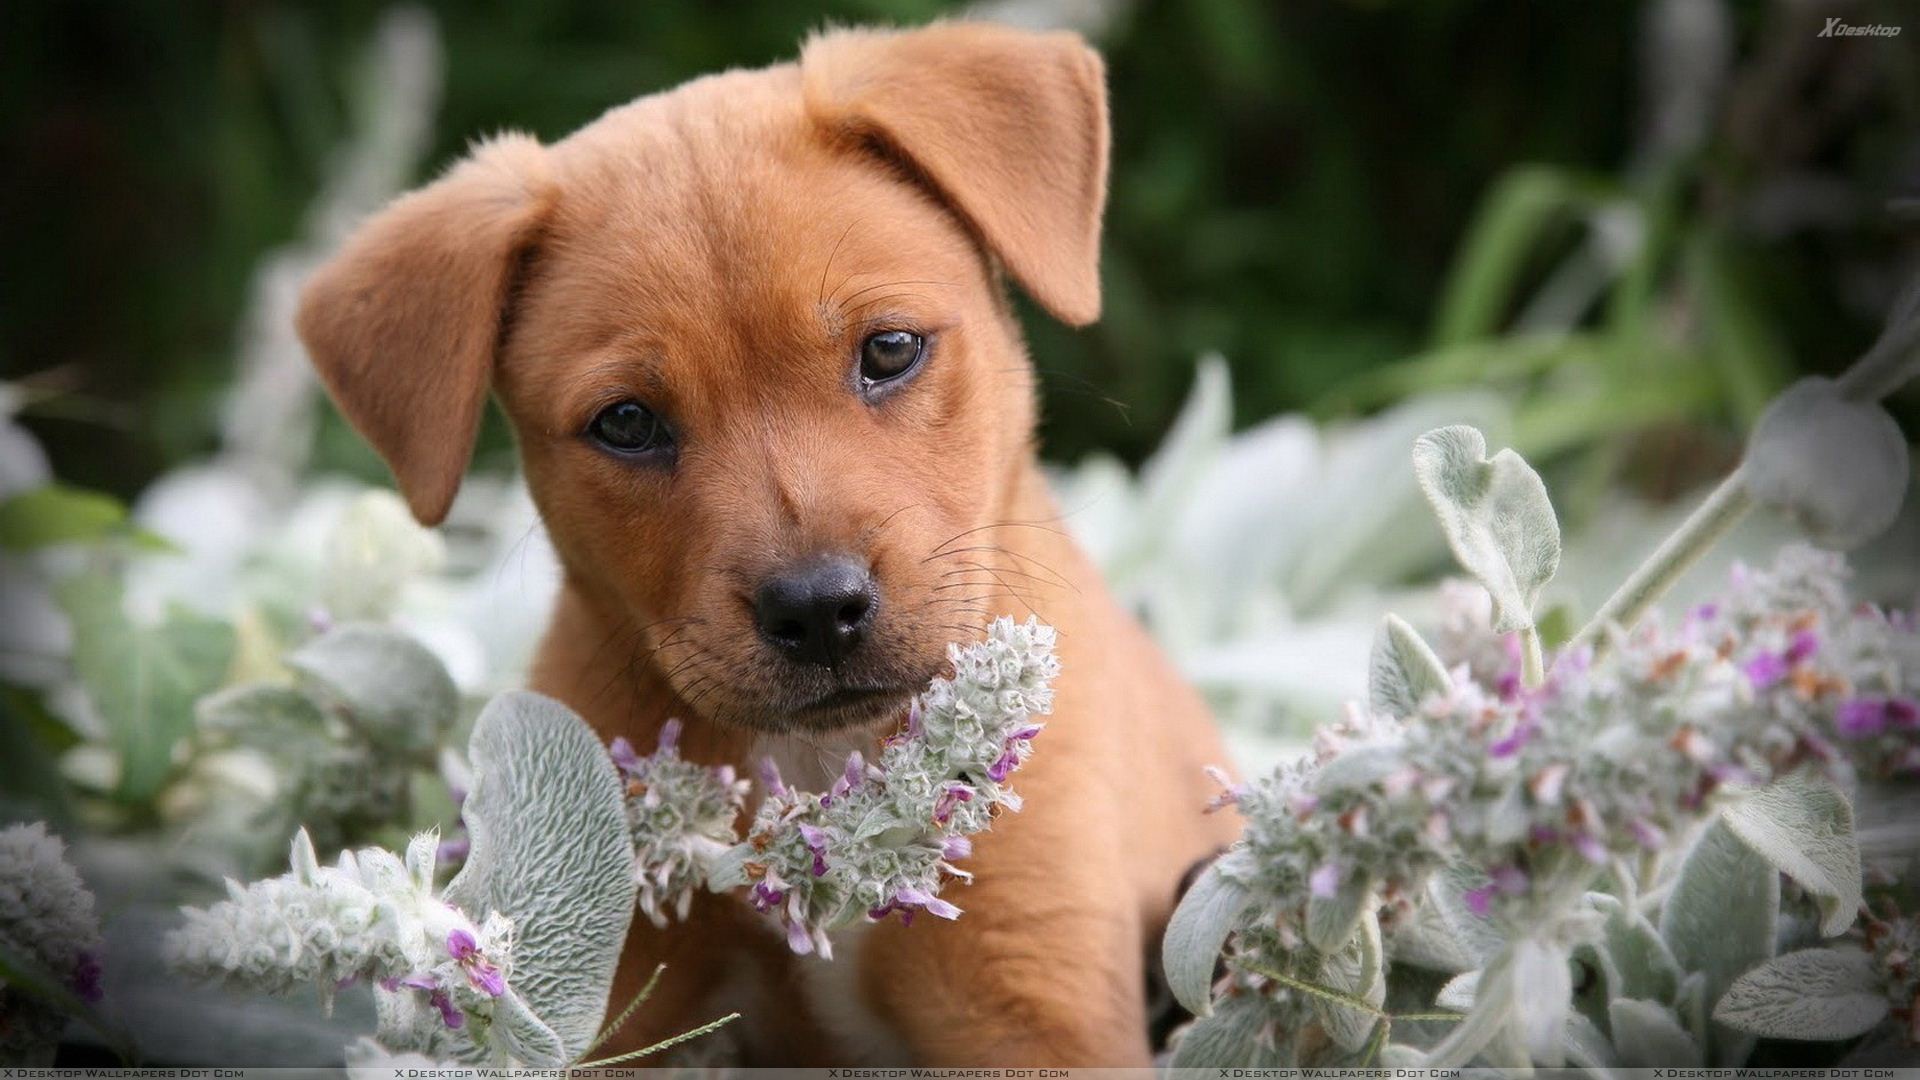 1920x1080 You are viewing wallpaper titled "Brown Little Puppy In Flowers" ...